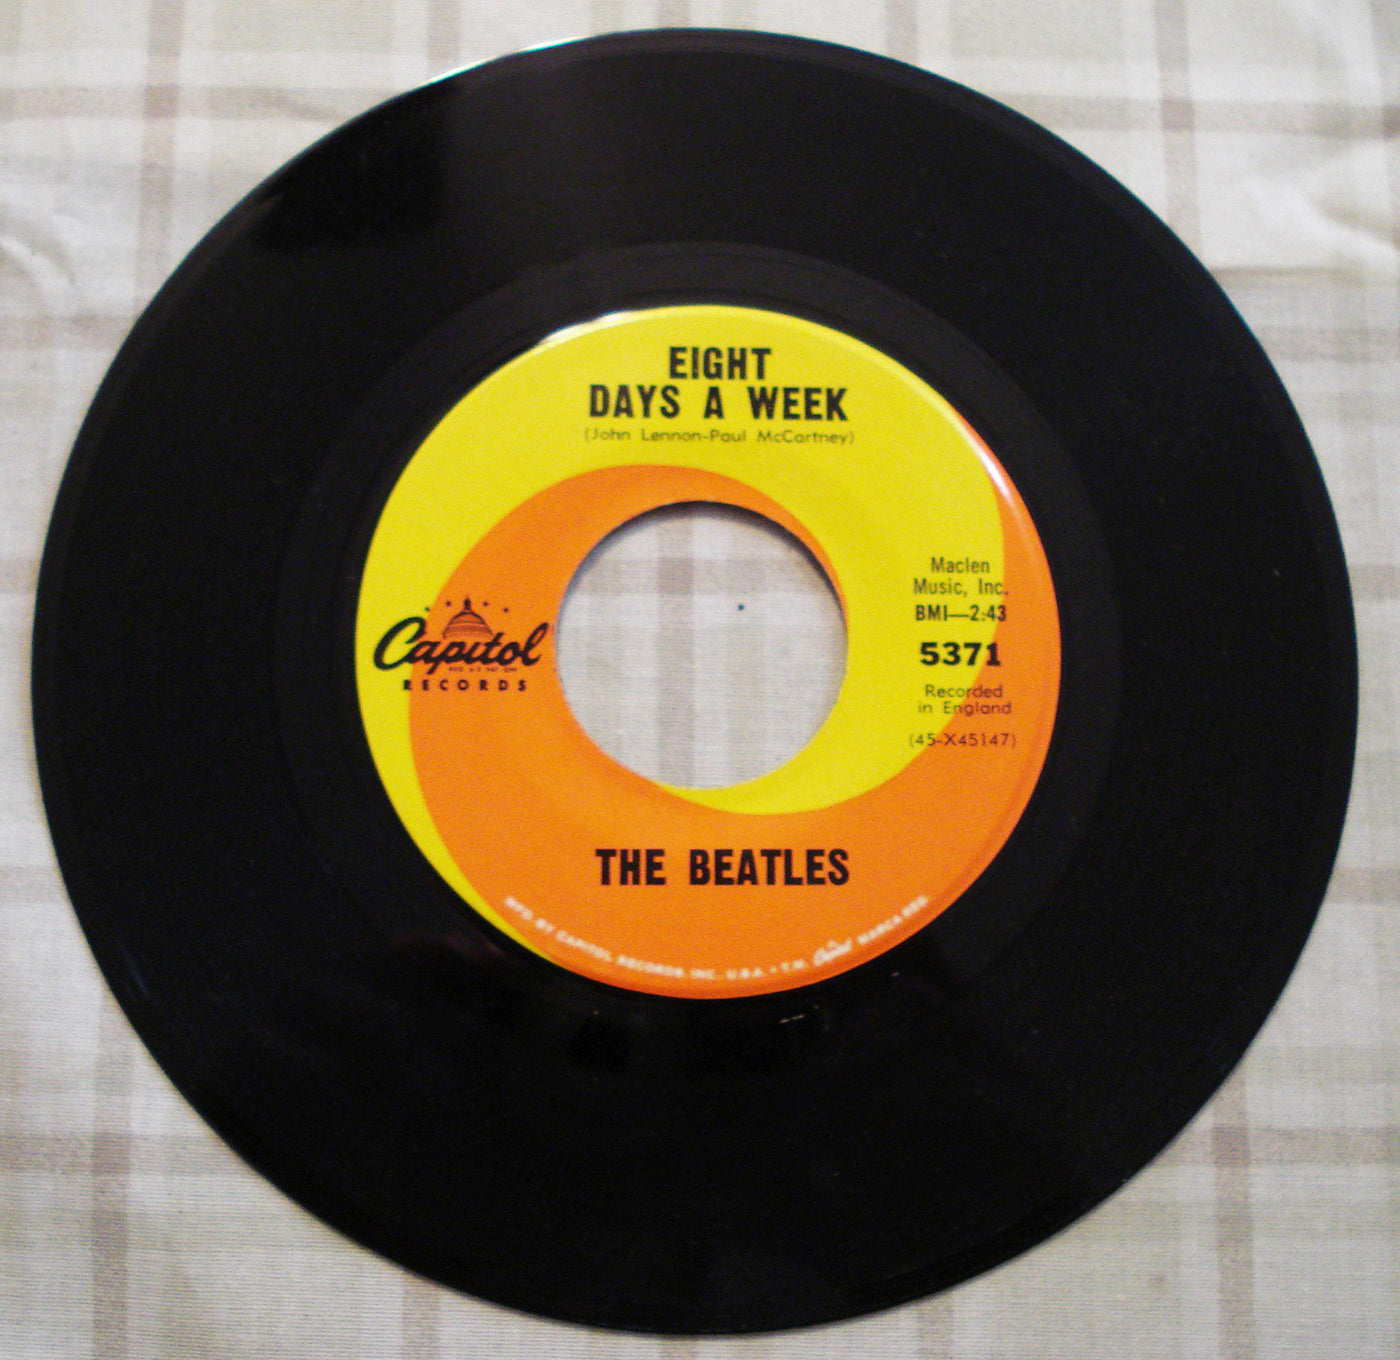 The Beatles Eight Days A Week-I Don't Want To Spoil The Party (1964) Vinyl Single 45rpm 5371